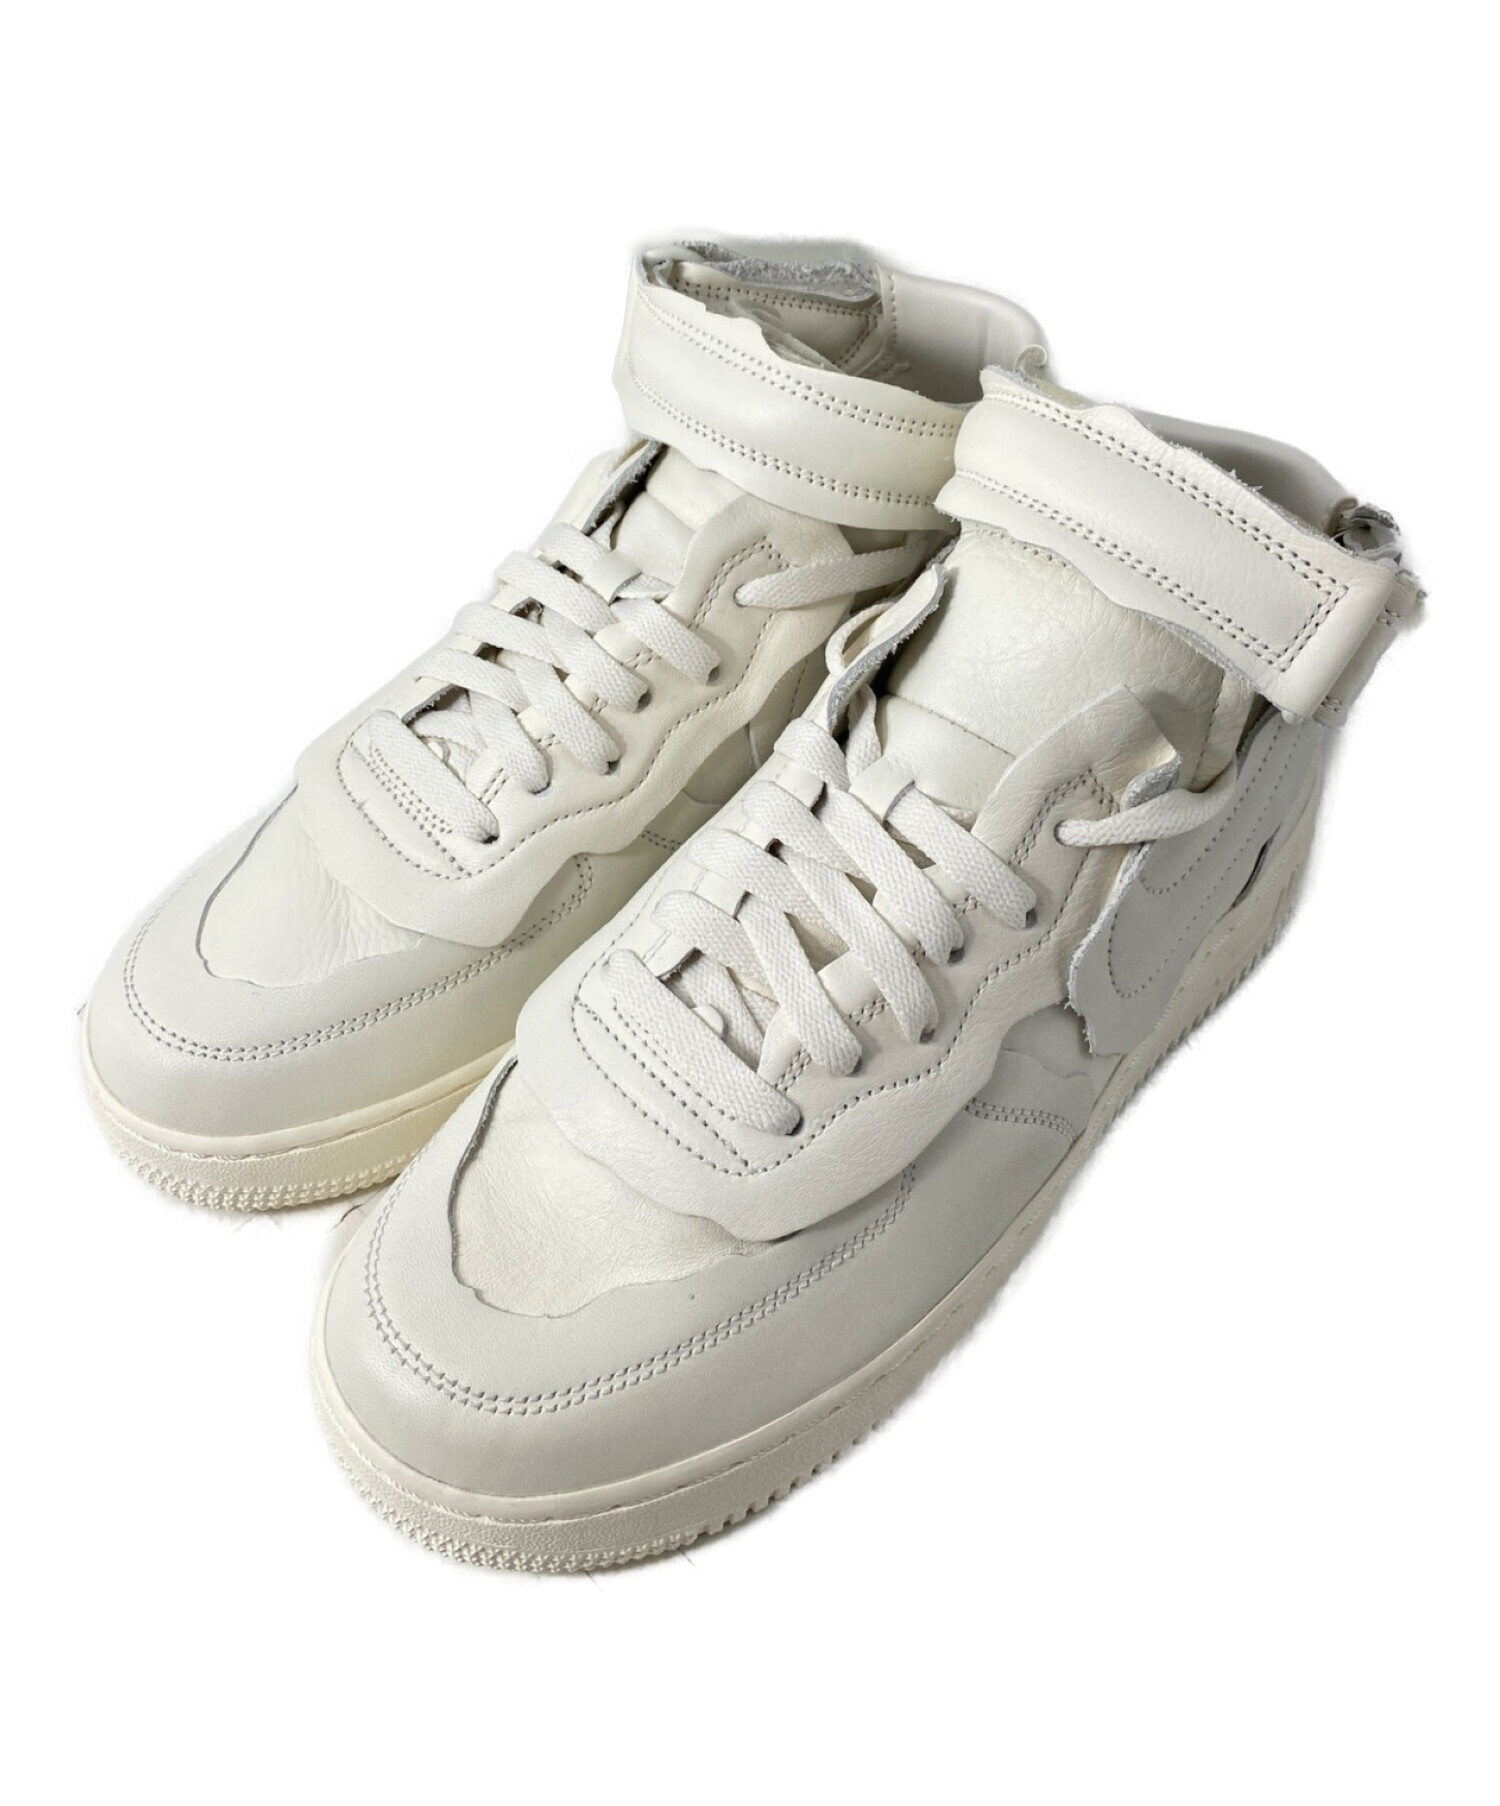 NIKE COMME des GARCONS HOMME PLUS COMME des GARCONS 20AW × NIKE Air Force1  Mid ナイキ エアフォースワン ミッド アイボリー サイズ:26.5 未使用品